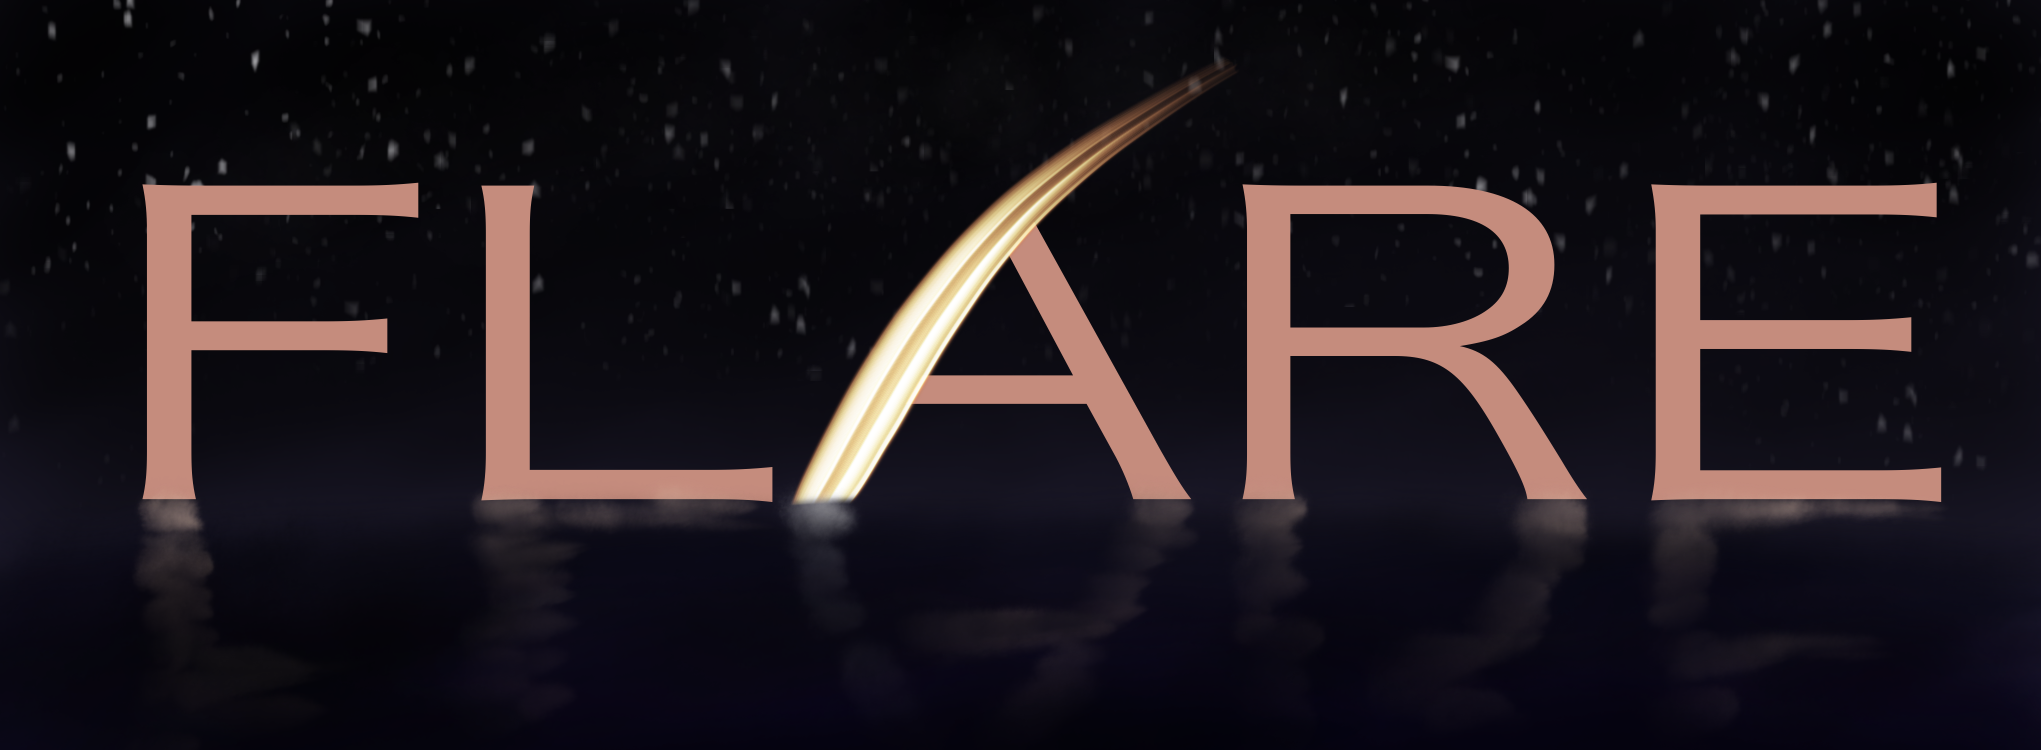 FLARE_logo.png